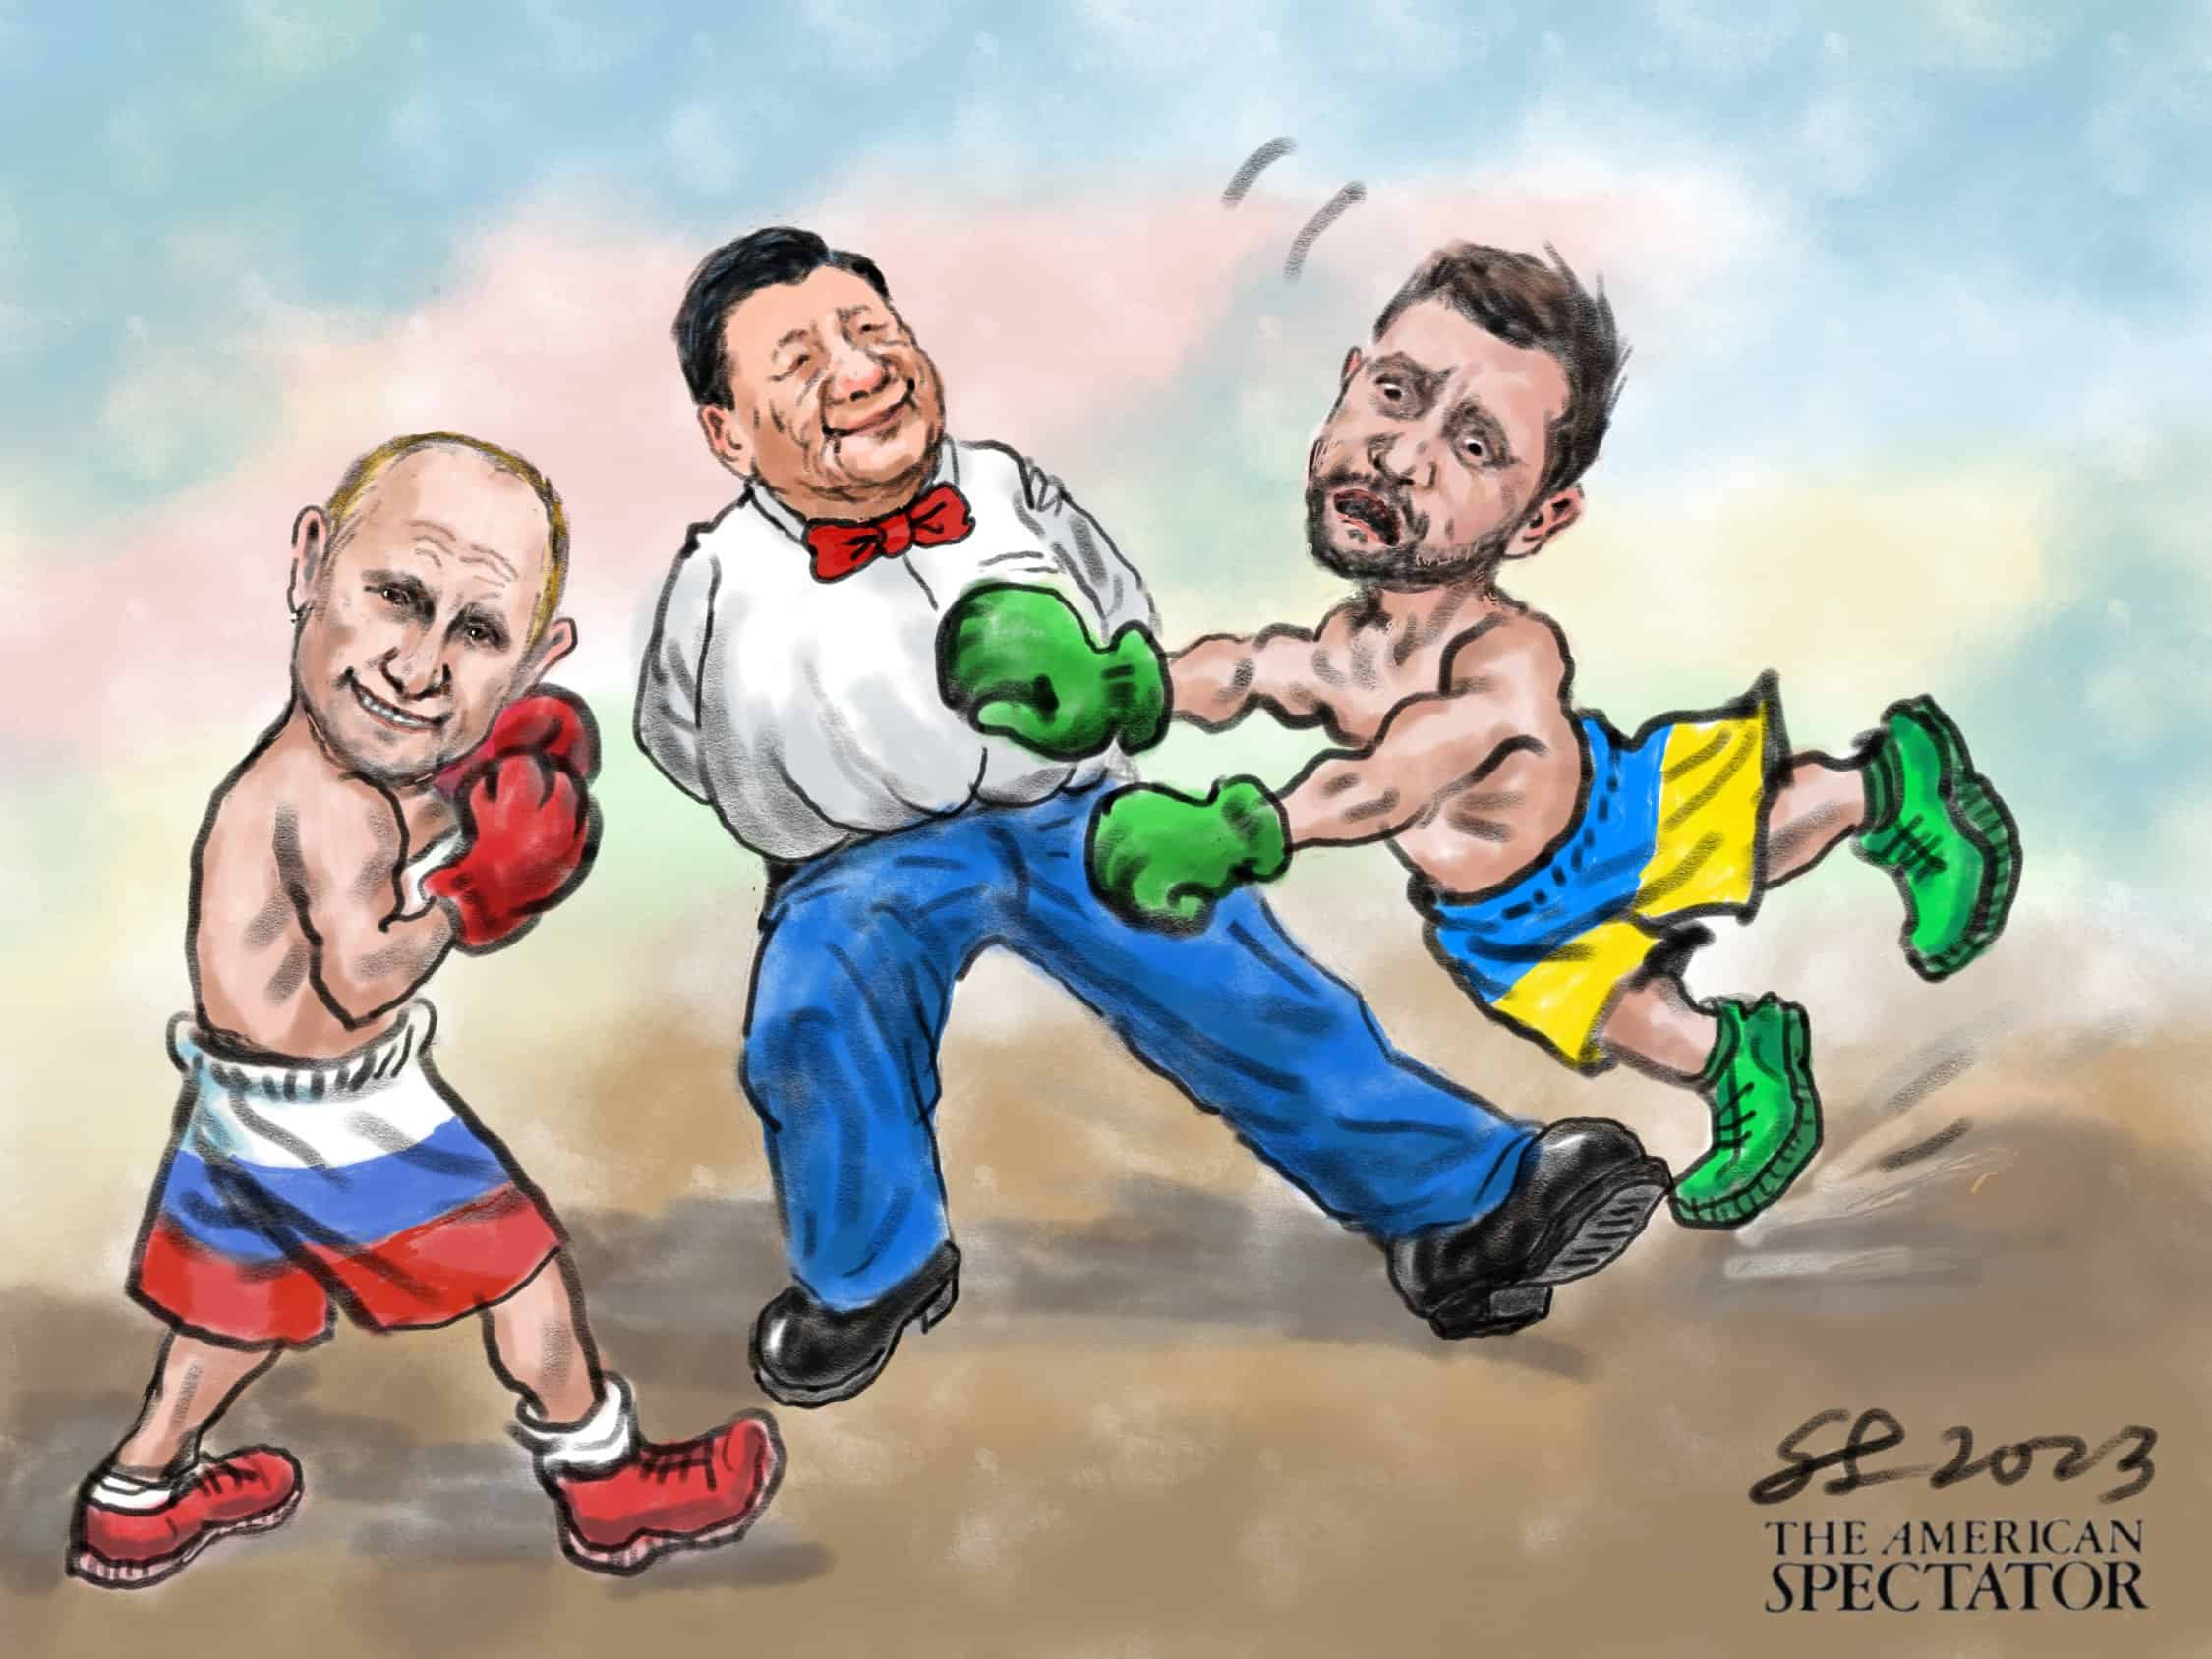 “Xi Jinping: The 'Neutral' Mediator,” editorial cartoon by Shaomin Li for The American Spectator, May 15, 2023.